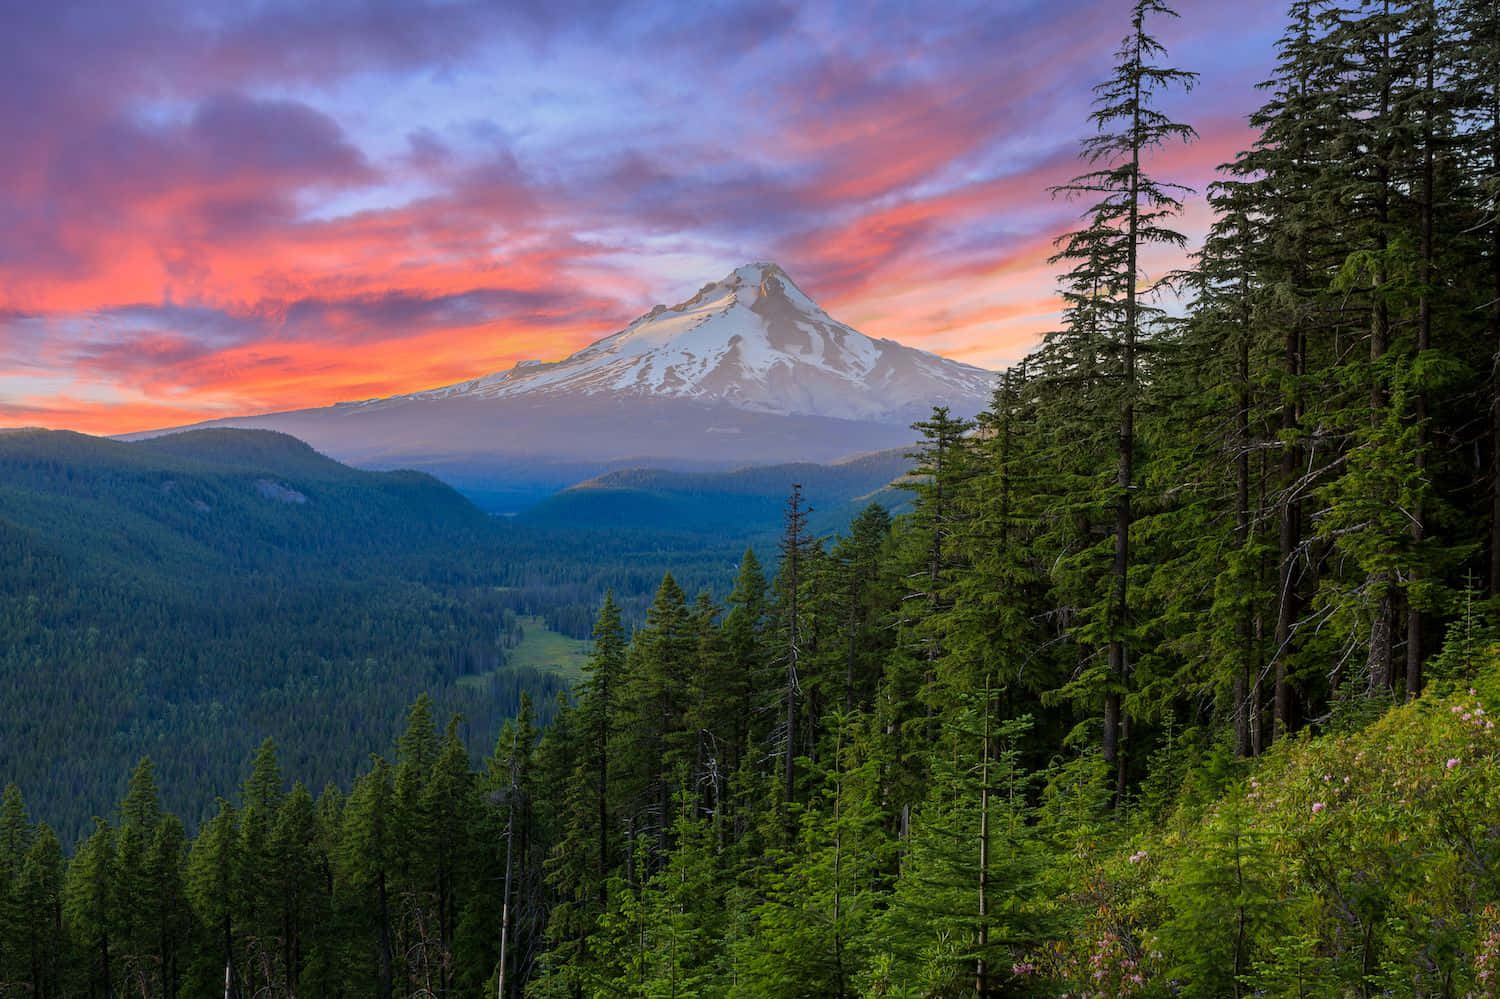 Beautiful view of the snow-capped Mount Hood in Oregon.